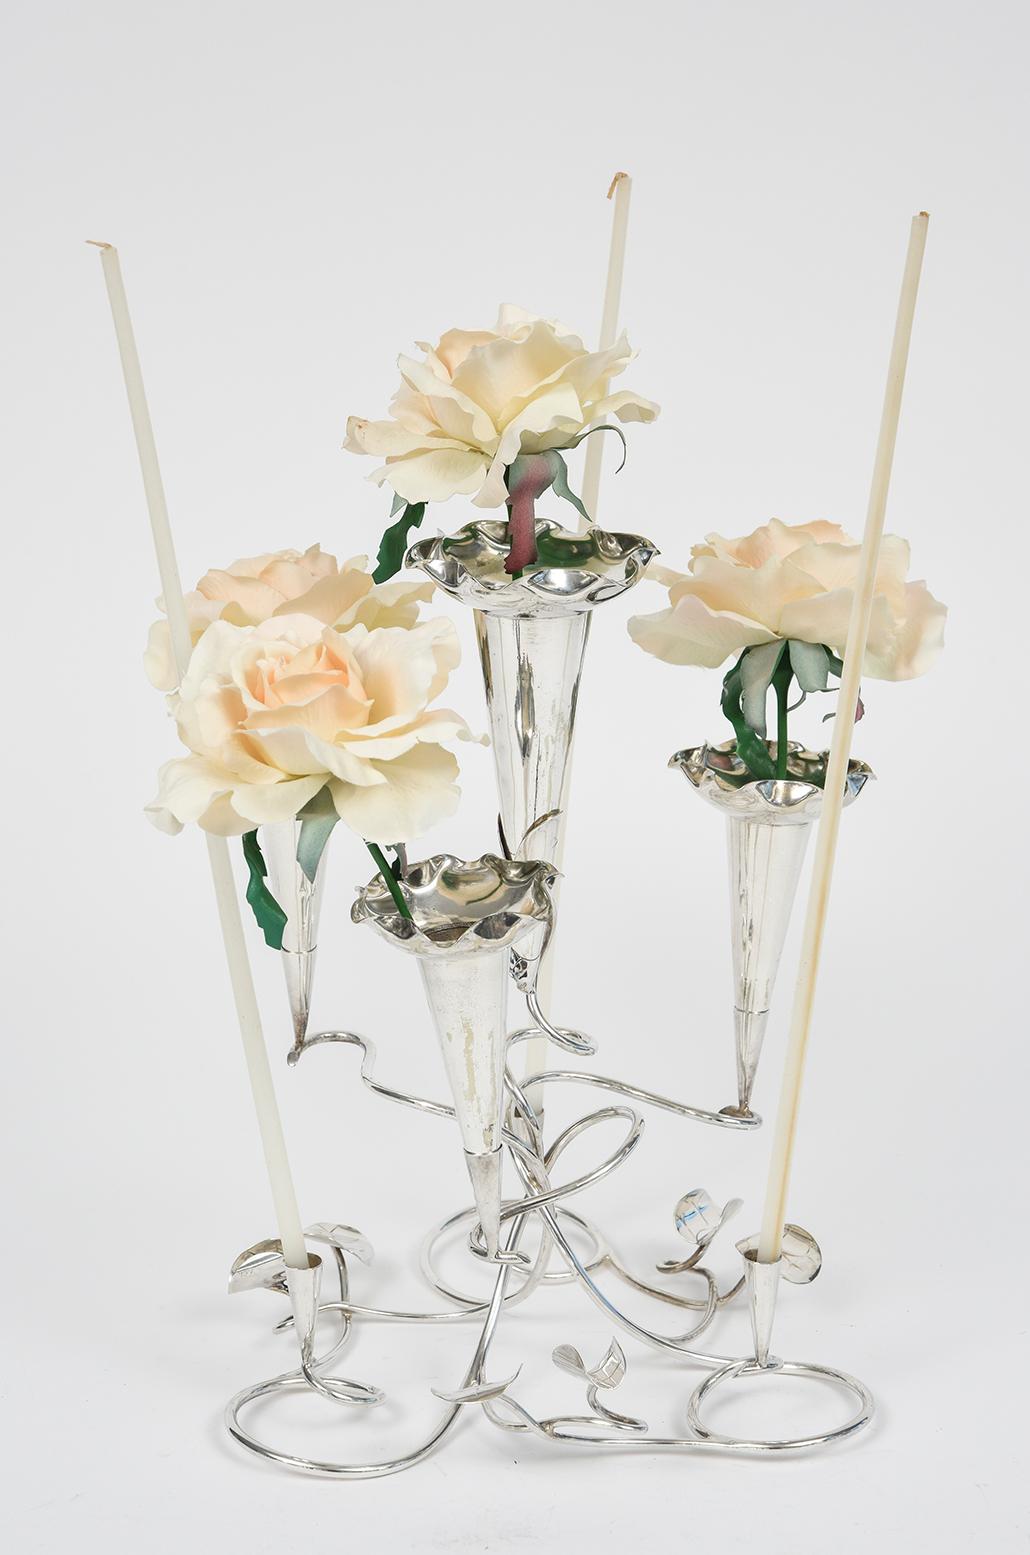 This exceptional early 20th century silverplate epergne has elegant detail work on  the 4 tulip inserts which can hold flowers in the central area .  They are scalloped and sit in the intertwined upper level of the base which is garnished with